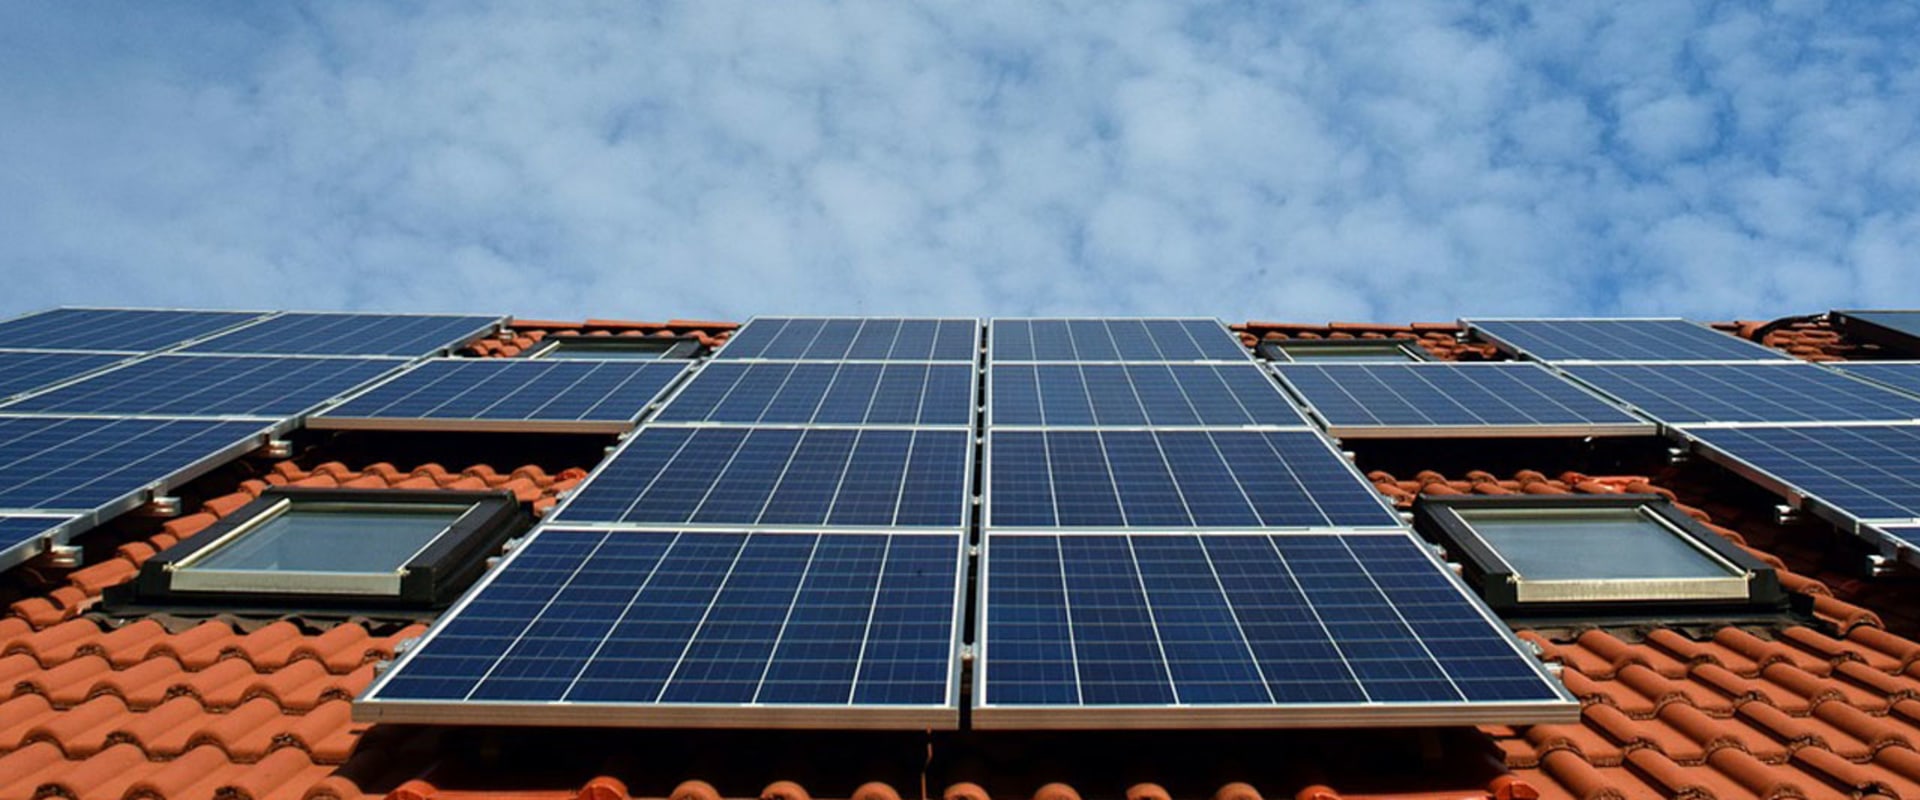 What is Solar Energy and How Can We Harness It?